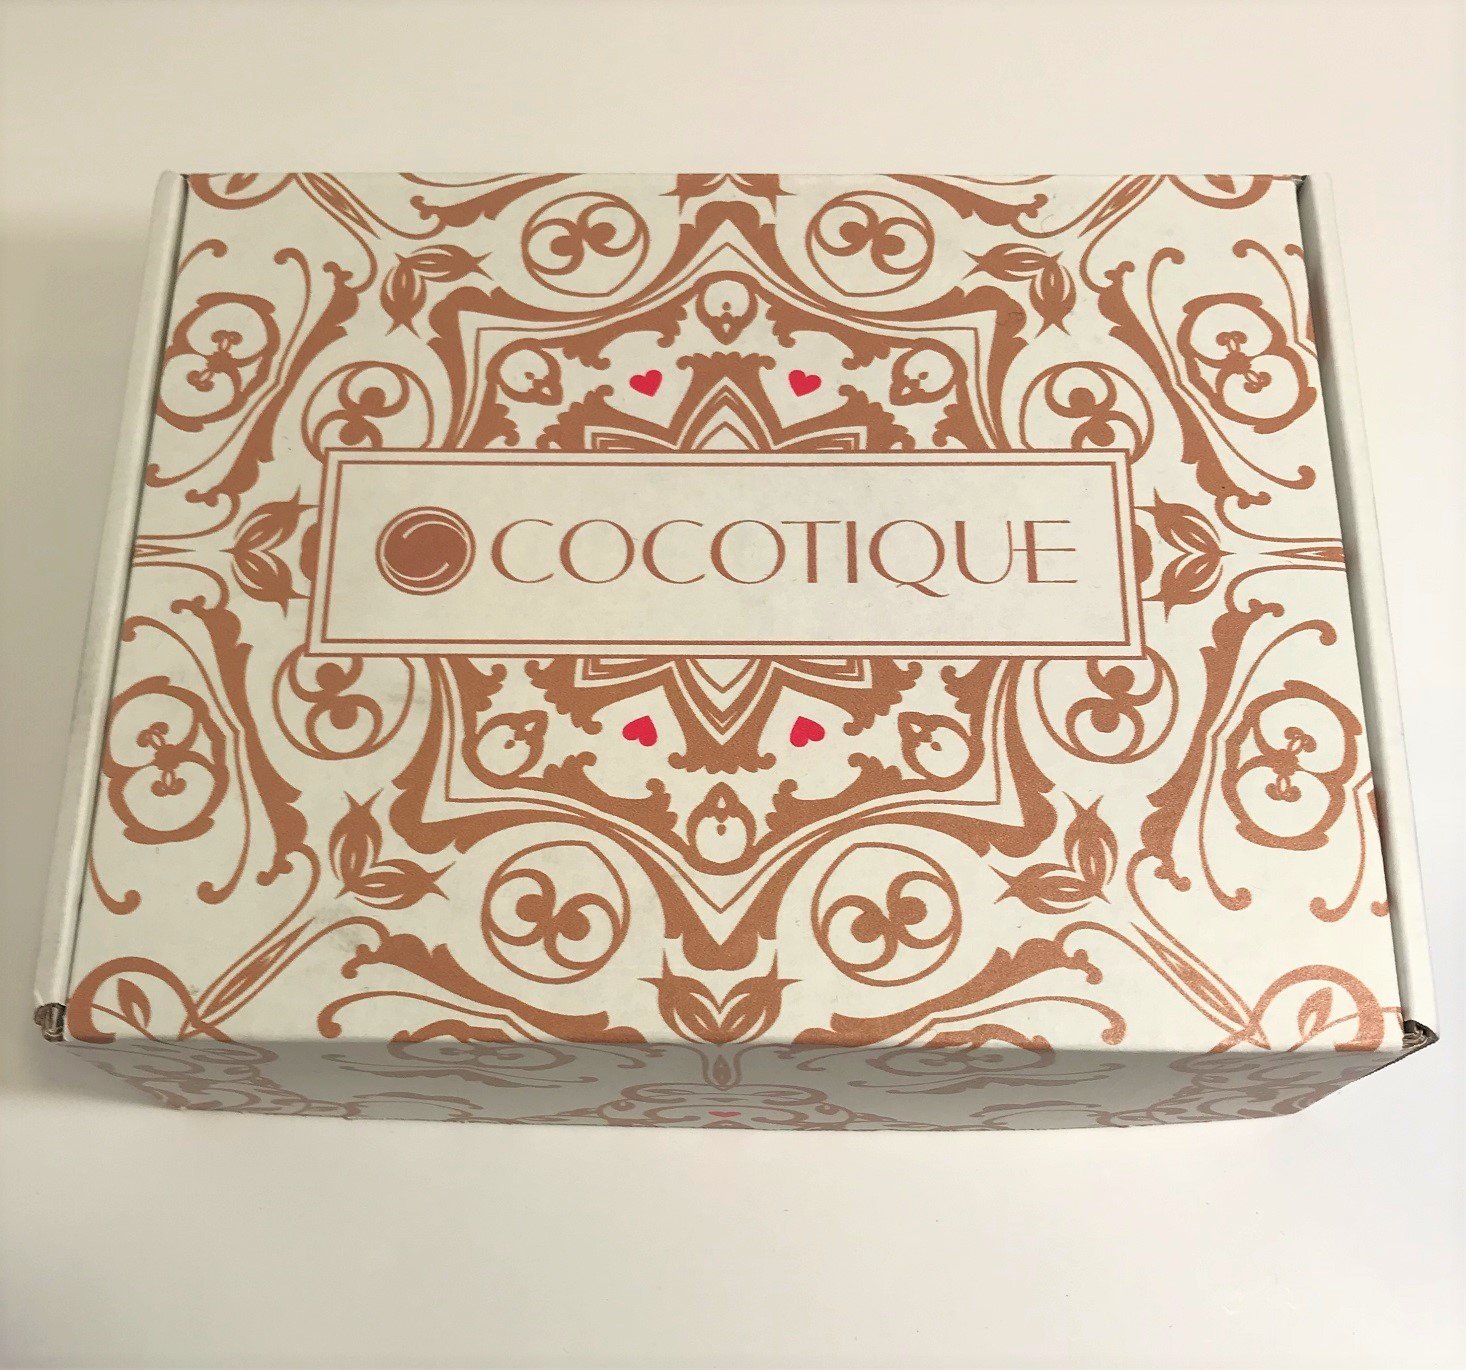 Cocotique has a Black Friday / Cyber Monday Deal available now – 25% off all Subscriptions